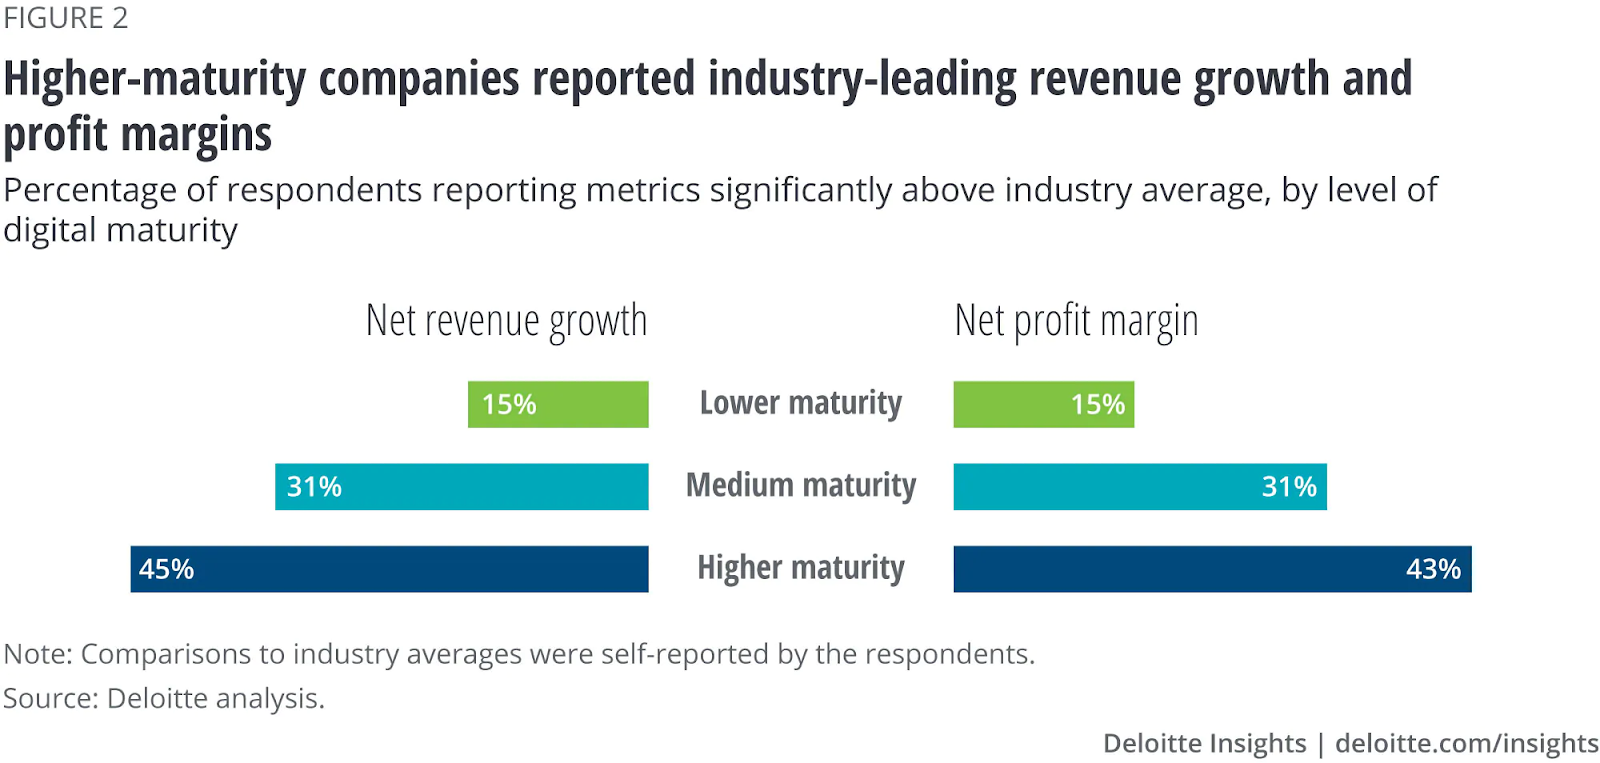 Higher maturity companies reported industry-leading revenue growth and profit margins